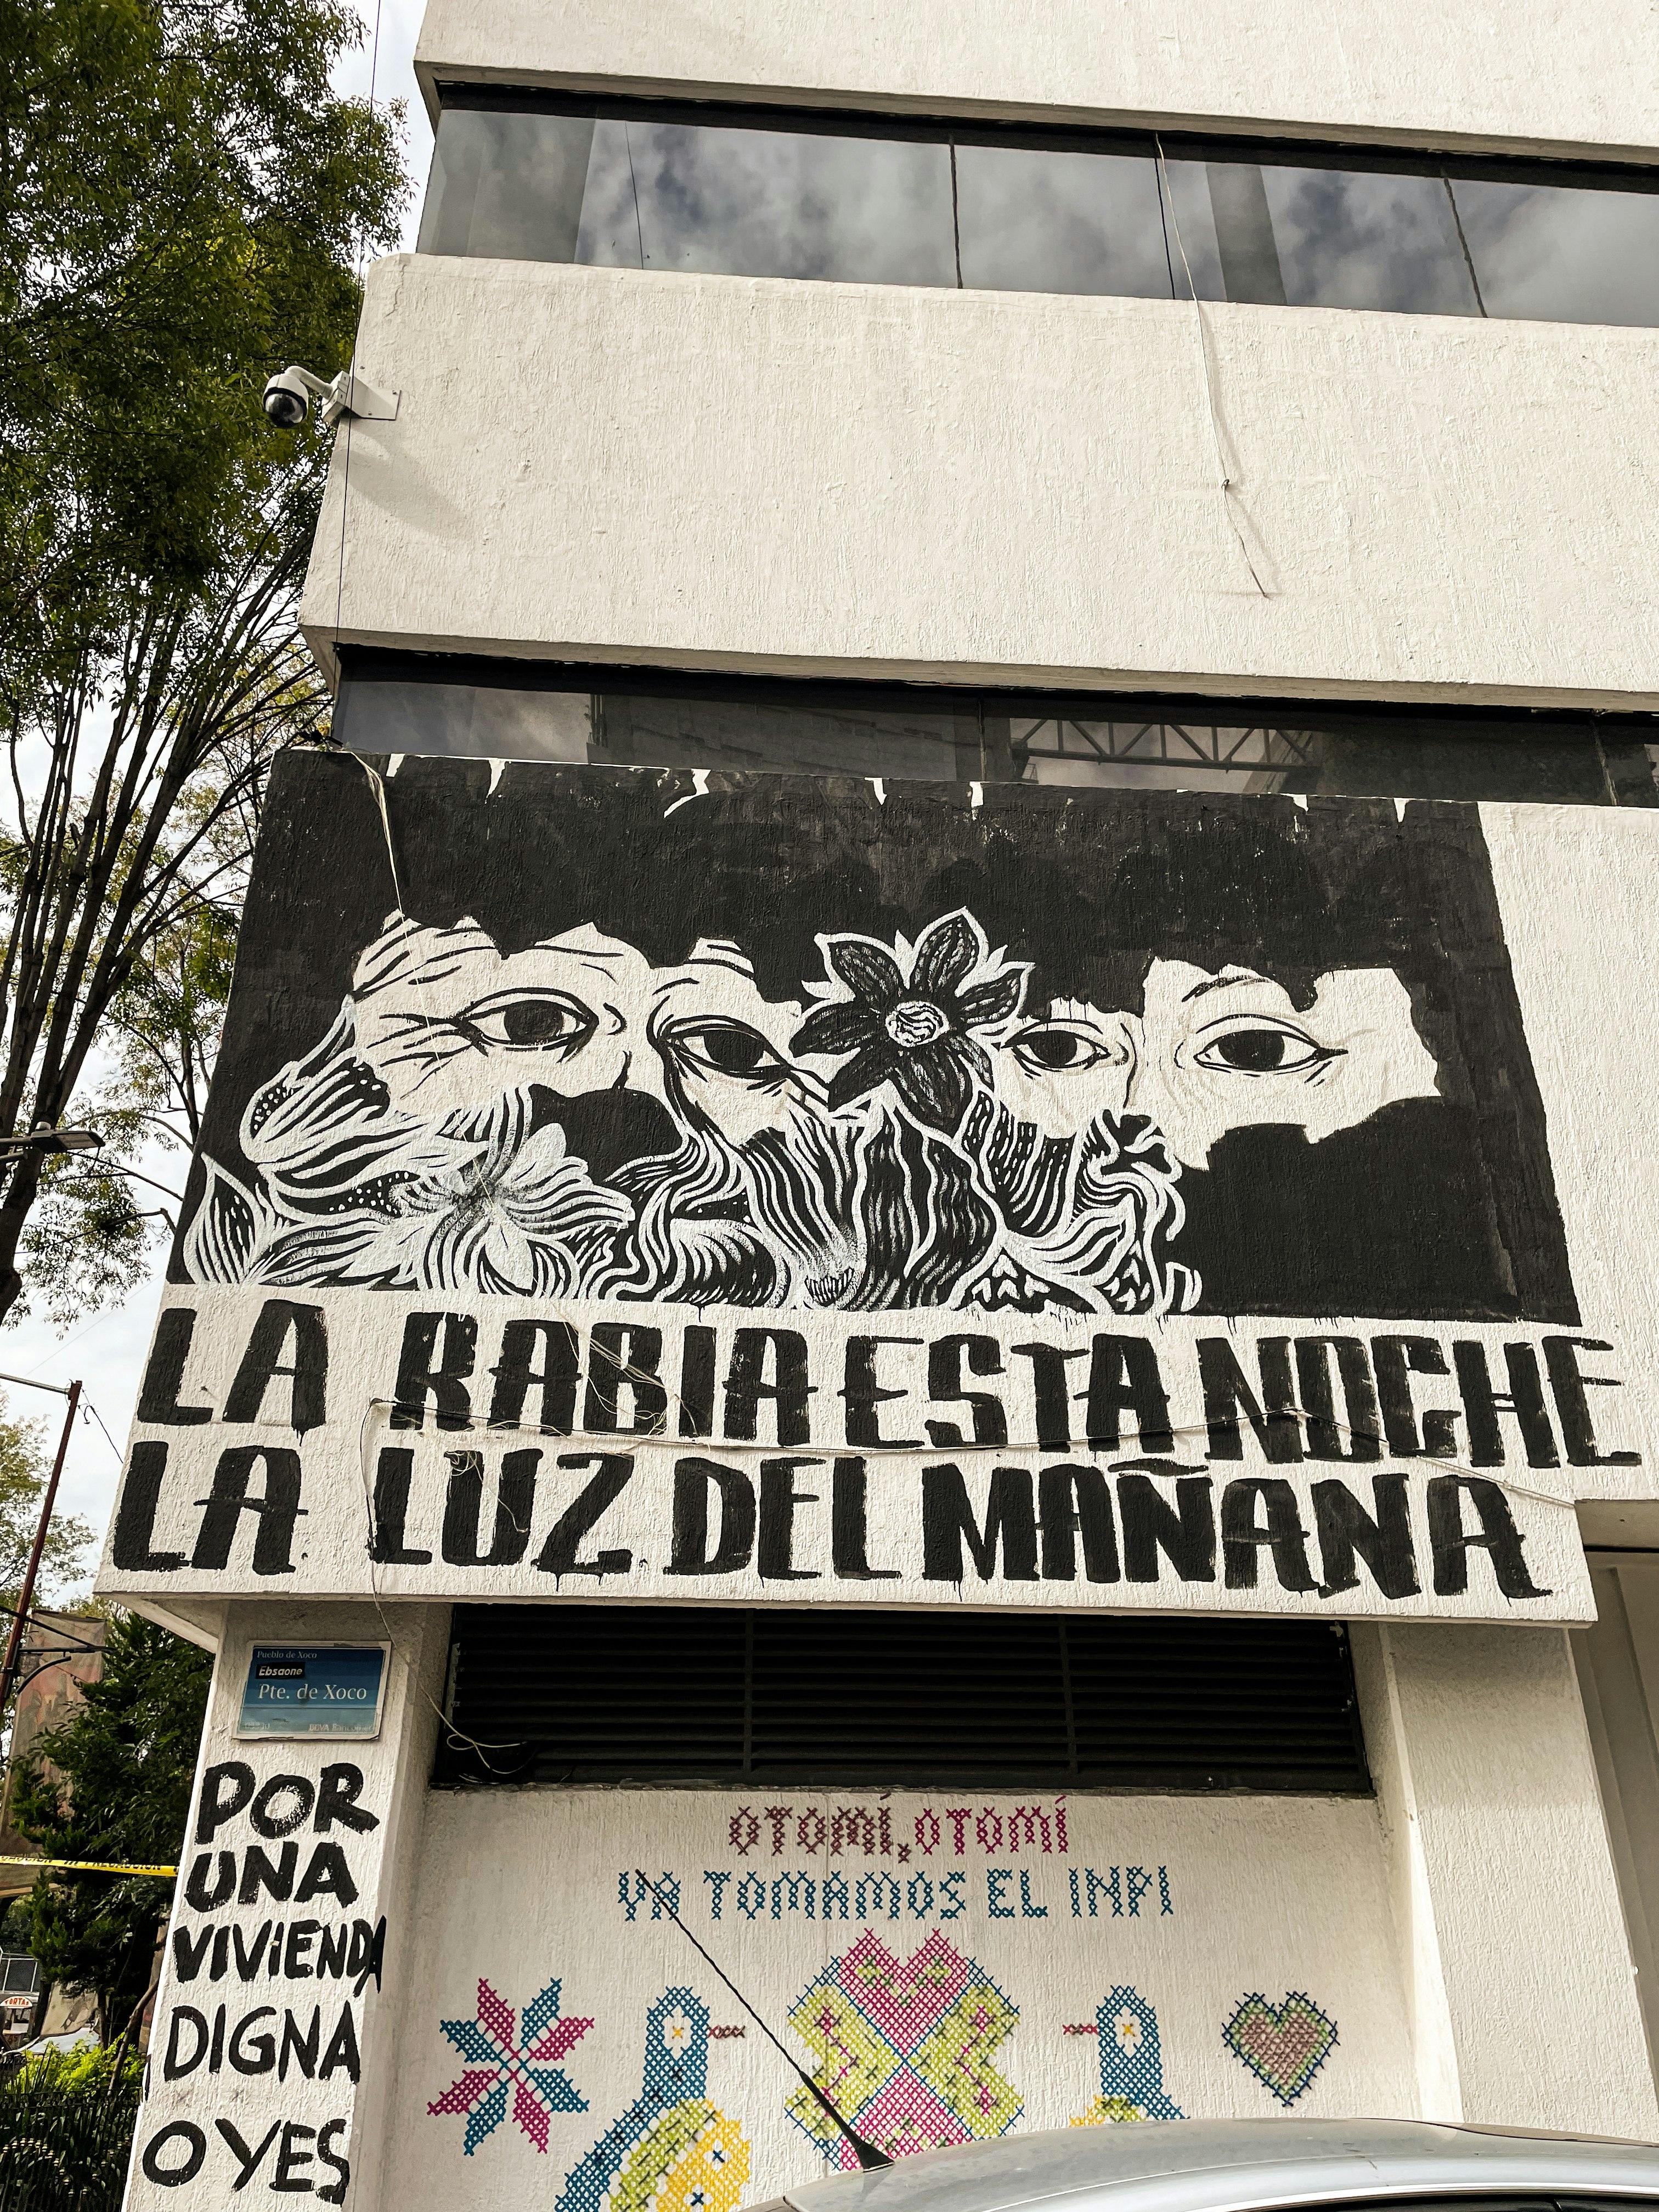 Protest street art by the native and locals against colonialism.